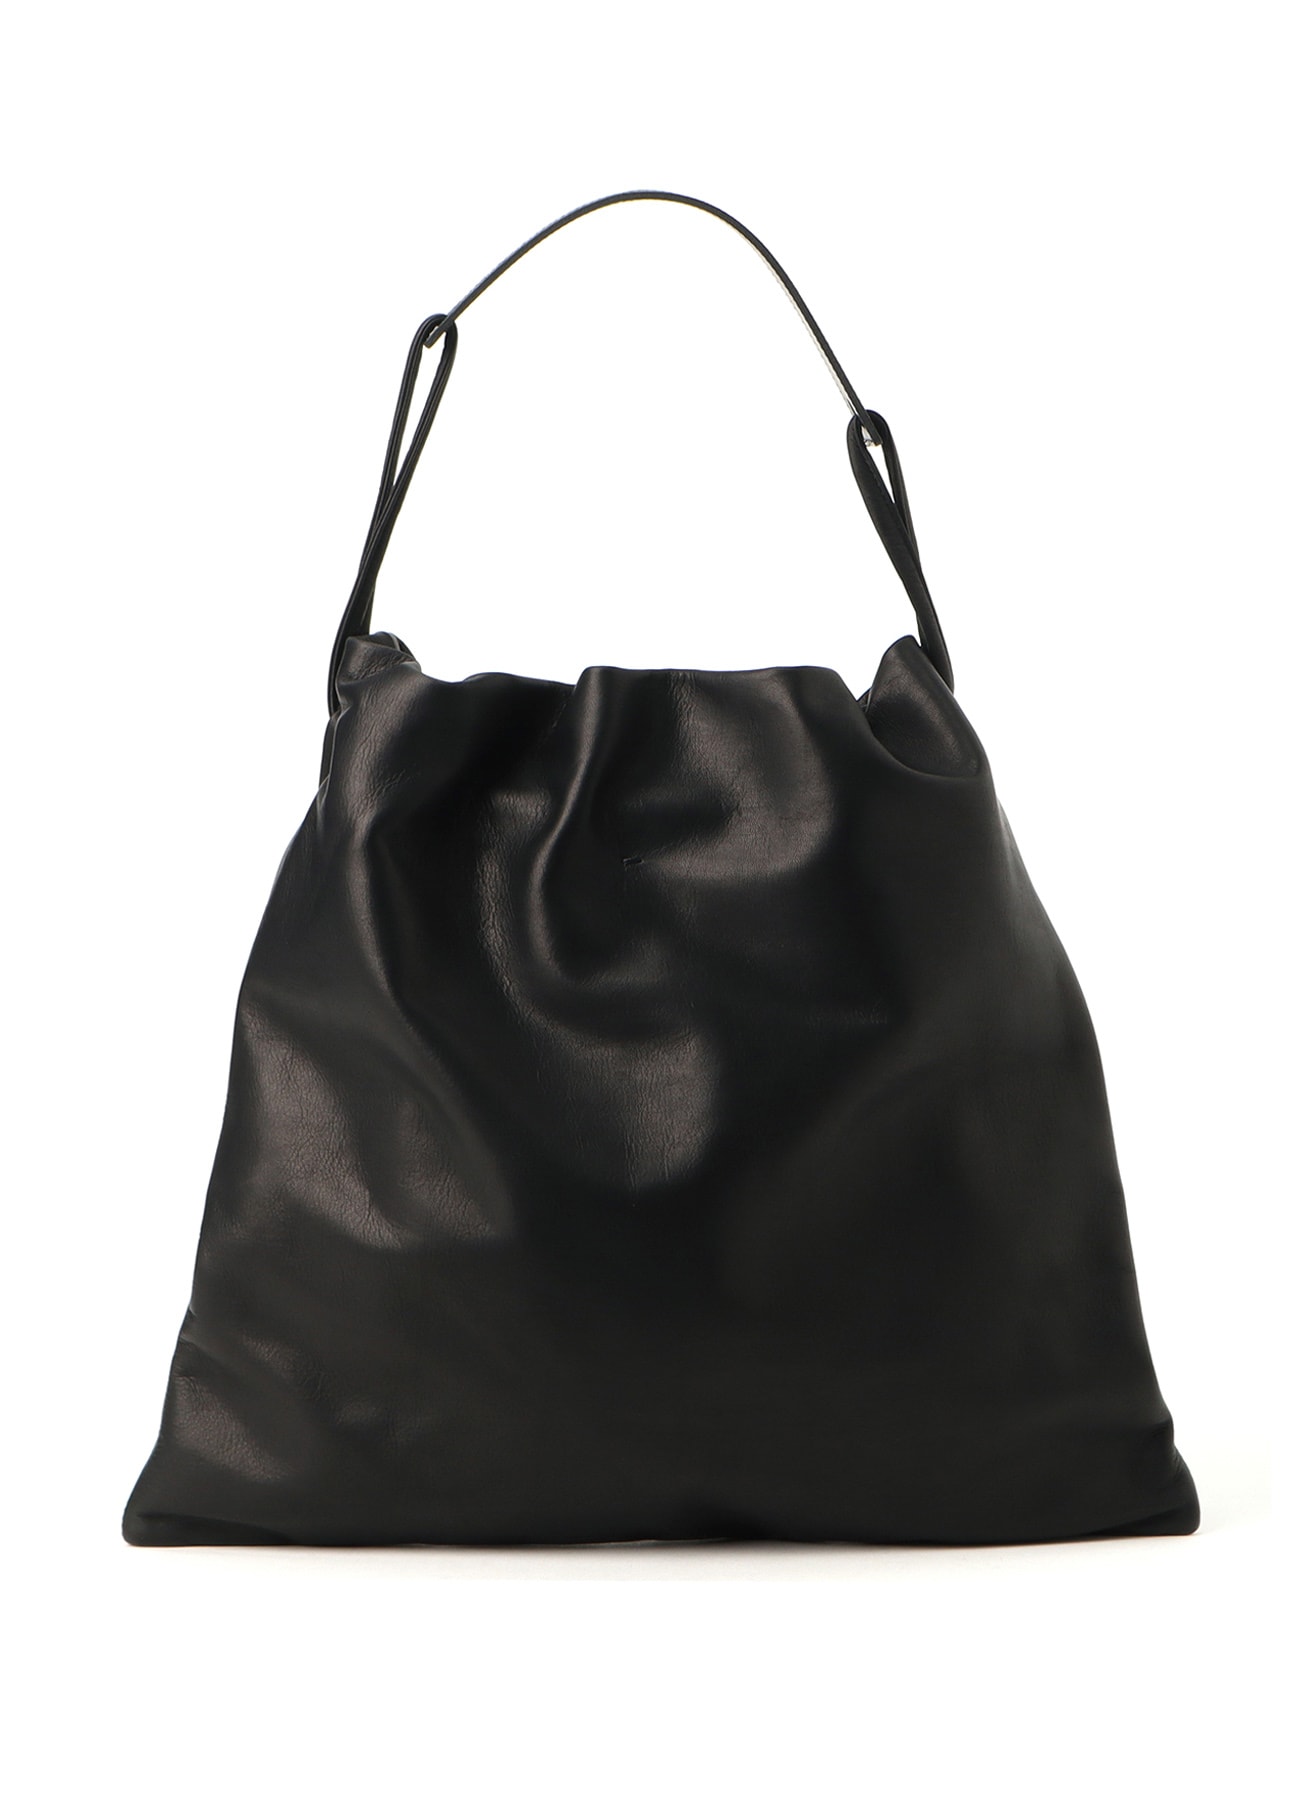 SOFT SMOOTH LEATHER TOTE BAG